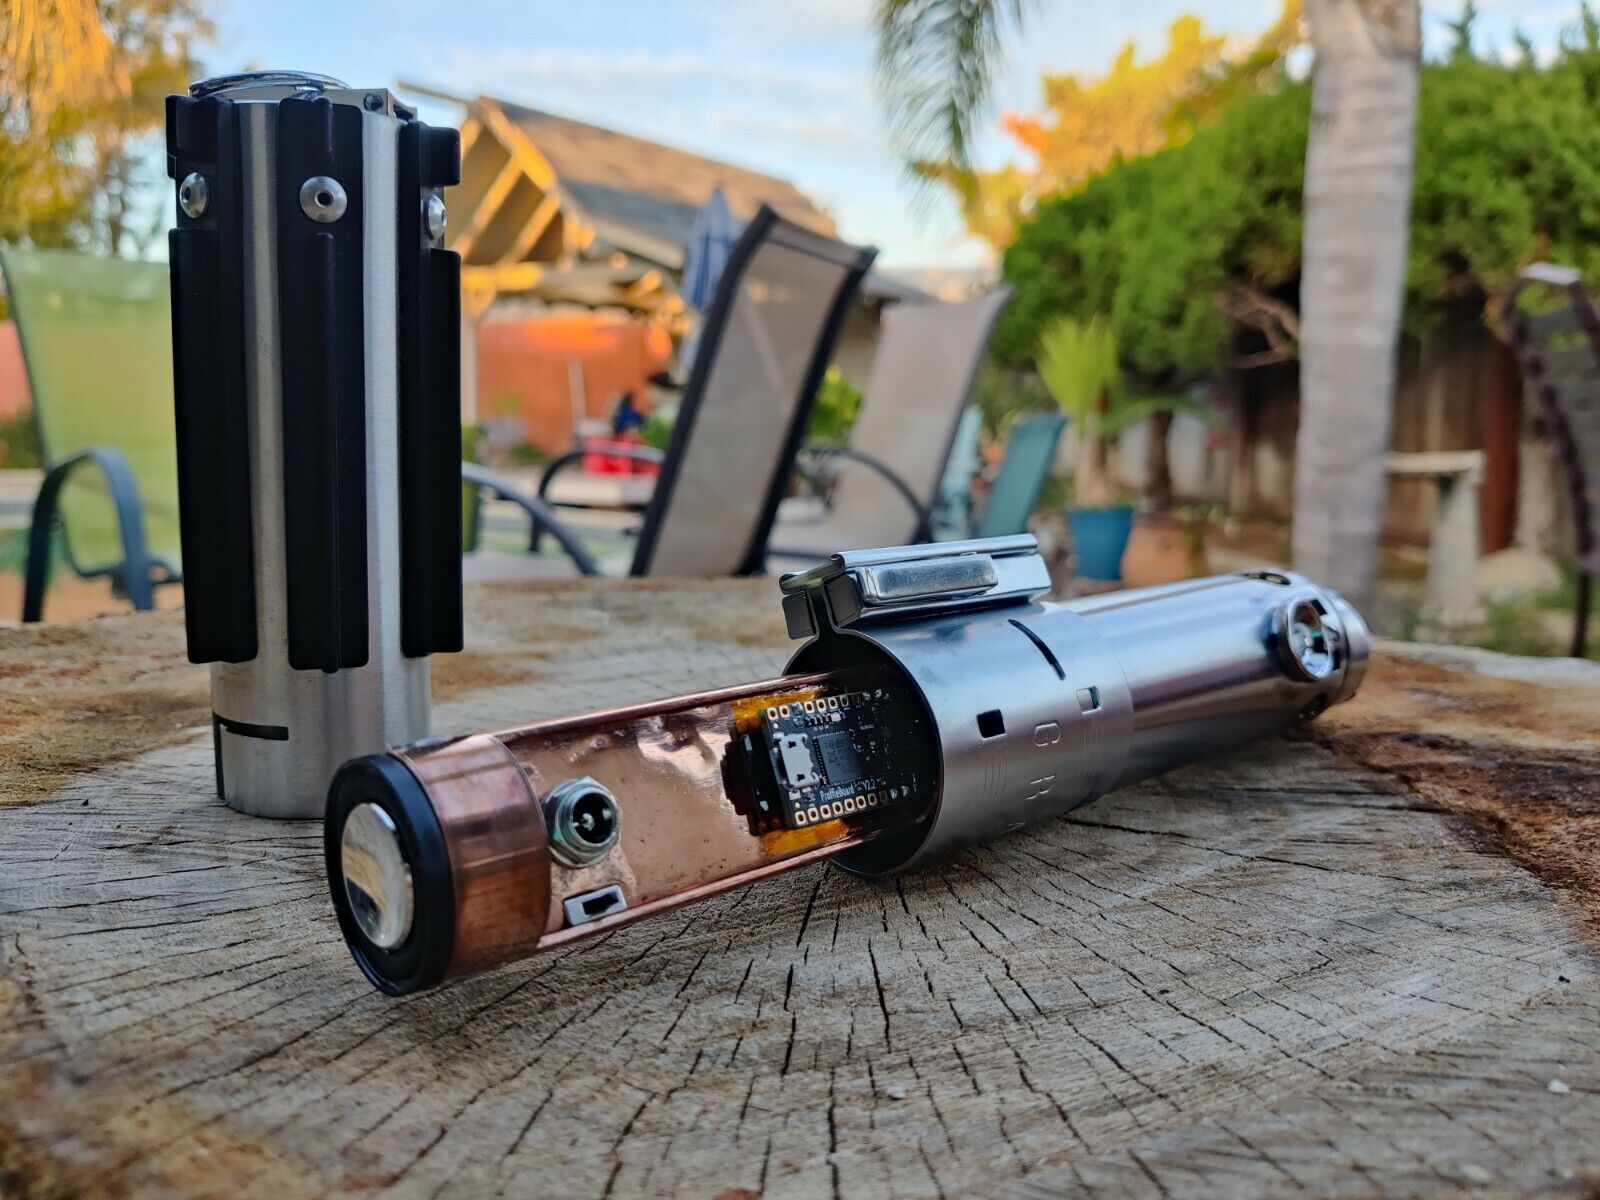 89Sabers Graflex pixel neo Lightsaber Proffieboard or cfx Copper chassis (MTO)